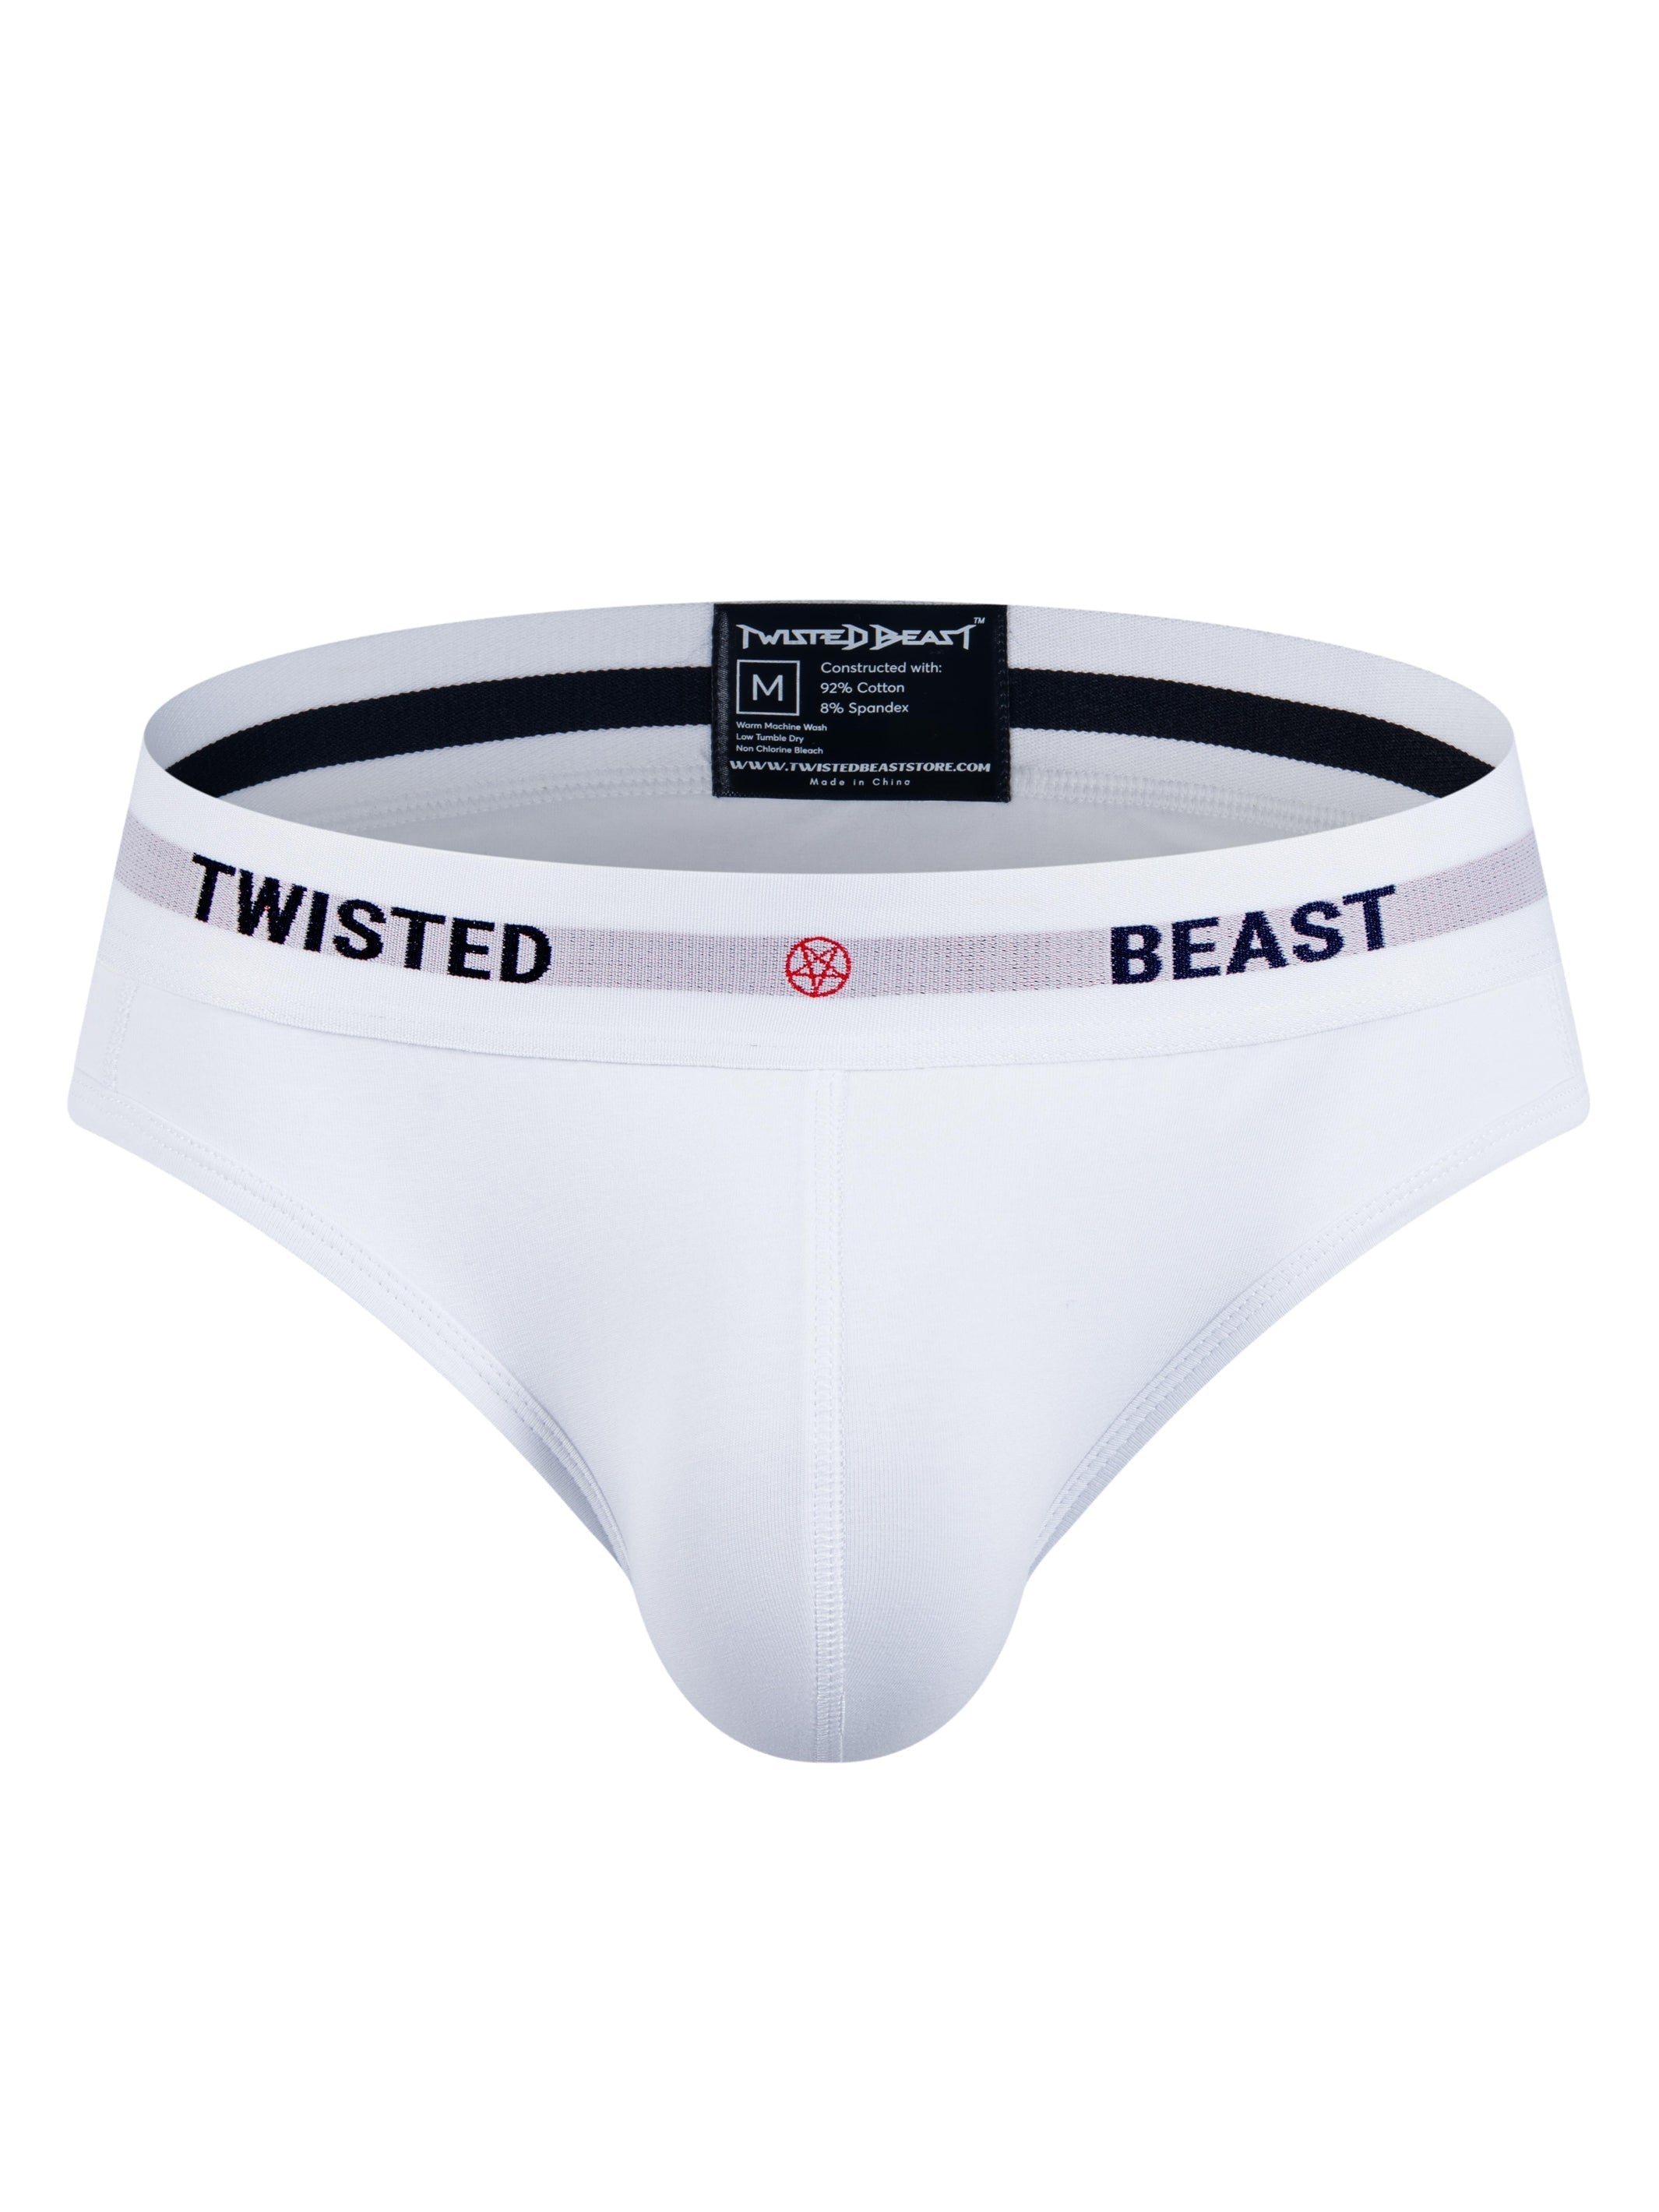 A Twisted Beast Insignia Brief in white.